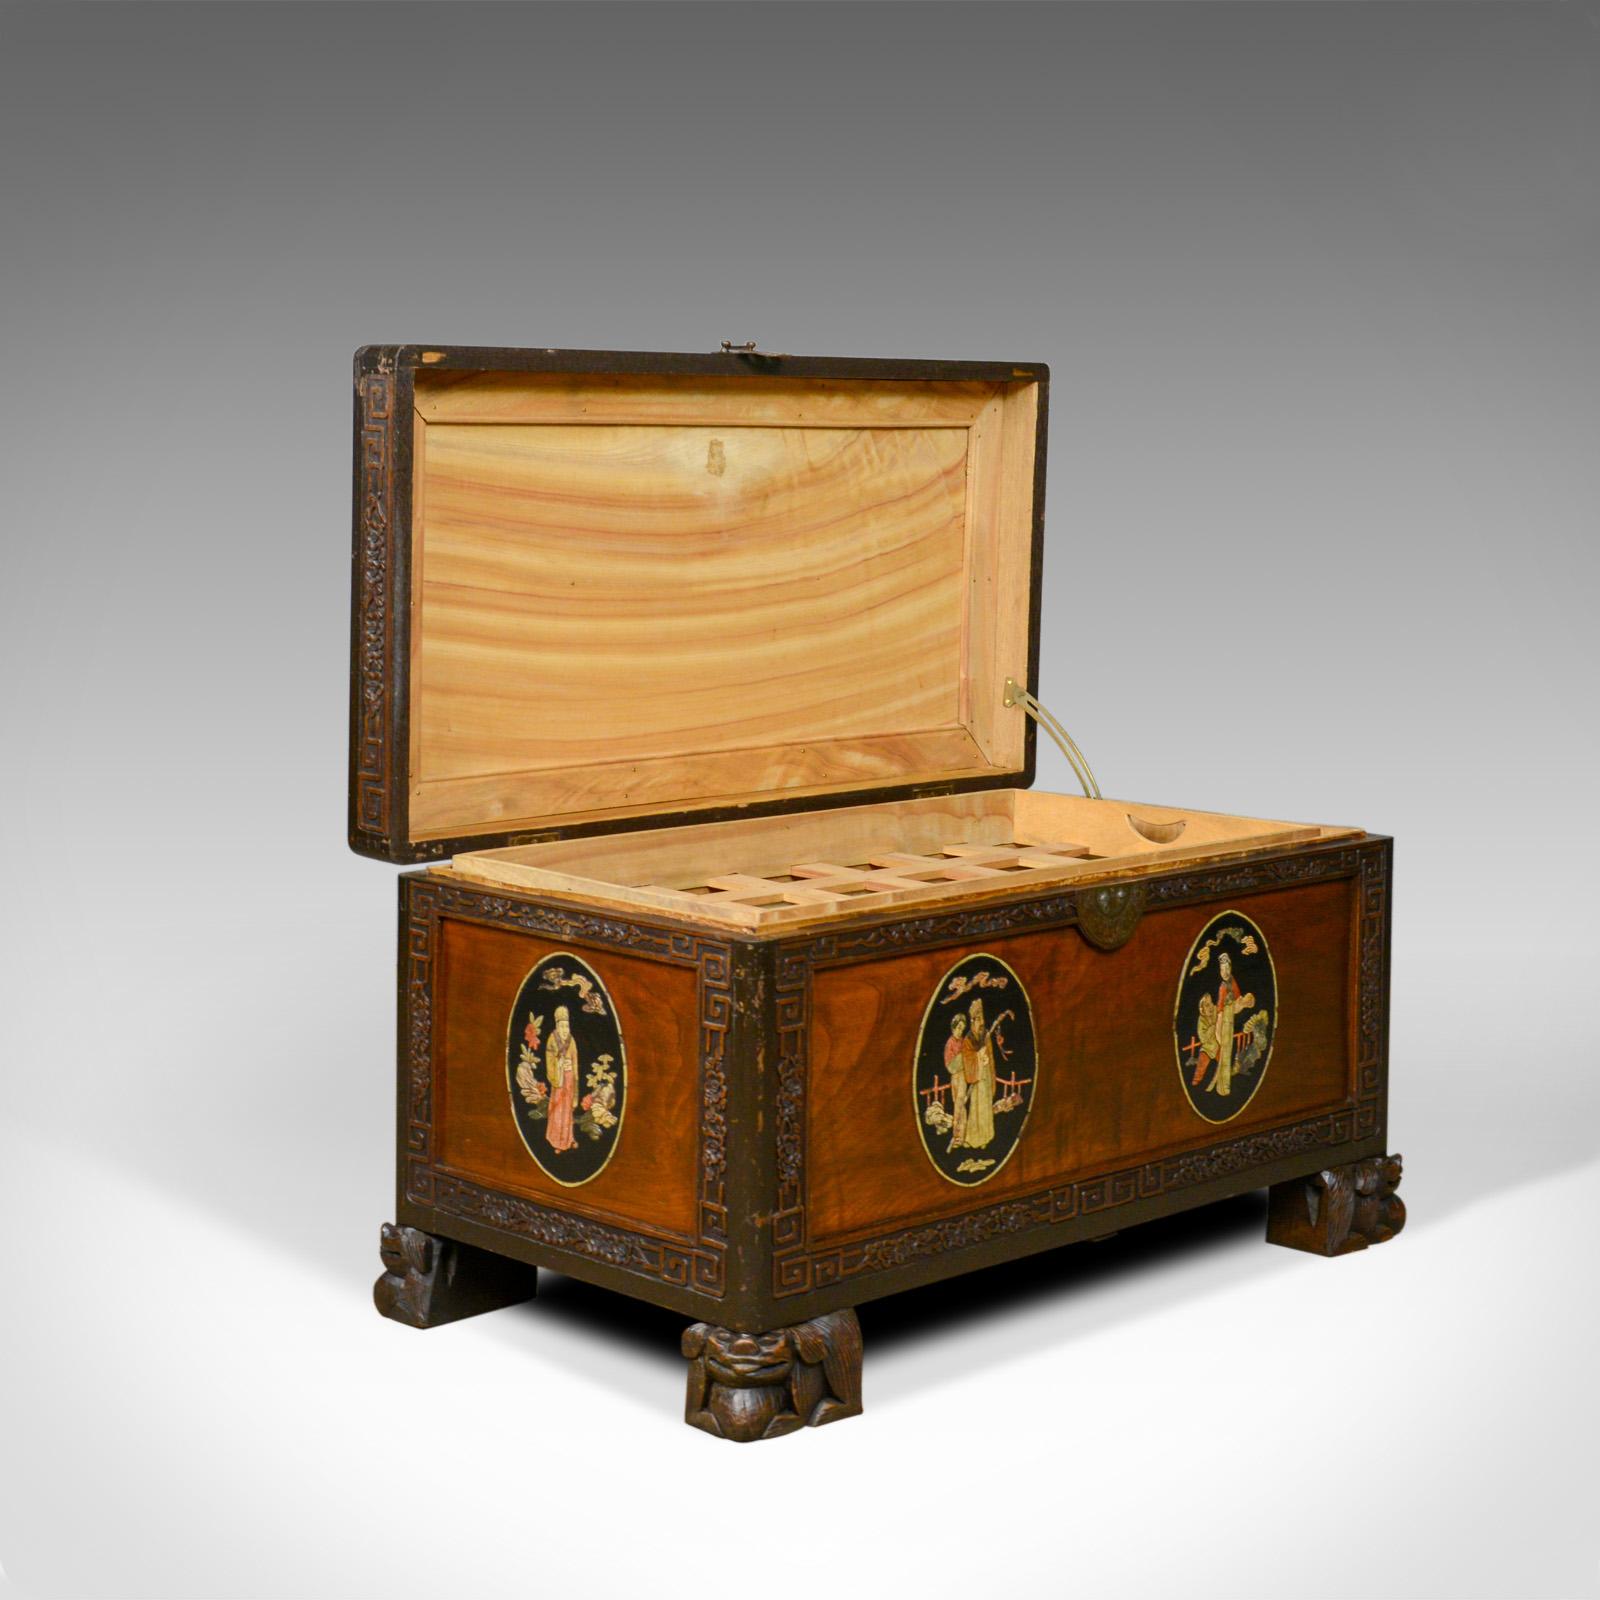 Wood Chinese Camphorwood Chest, Oriental Inlaid Scenes, Trunk, Art Deco Period